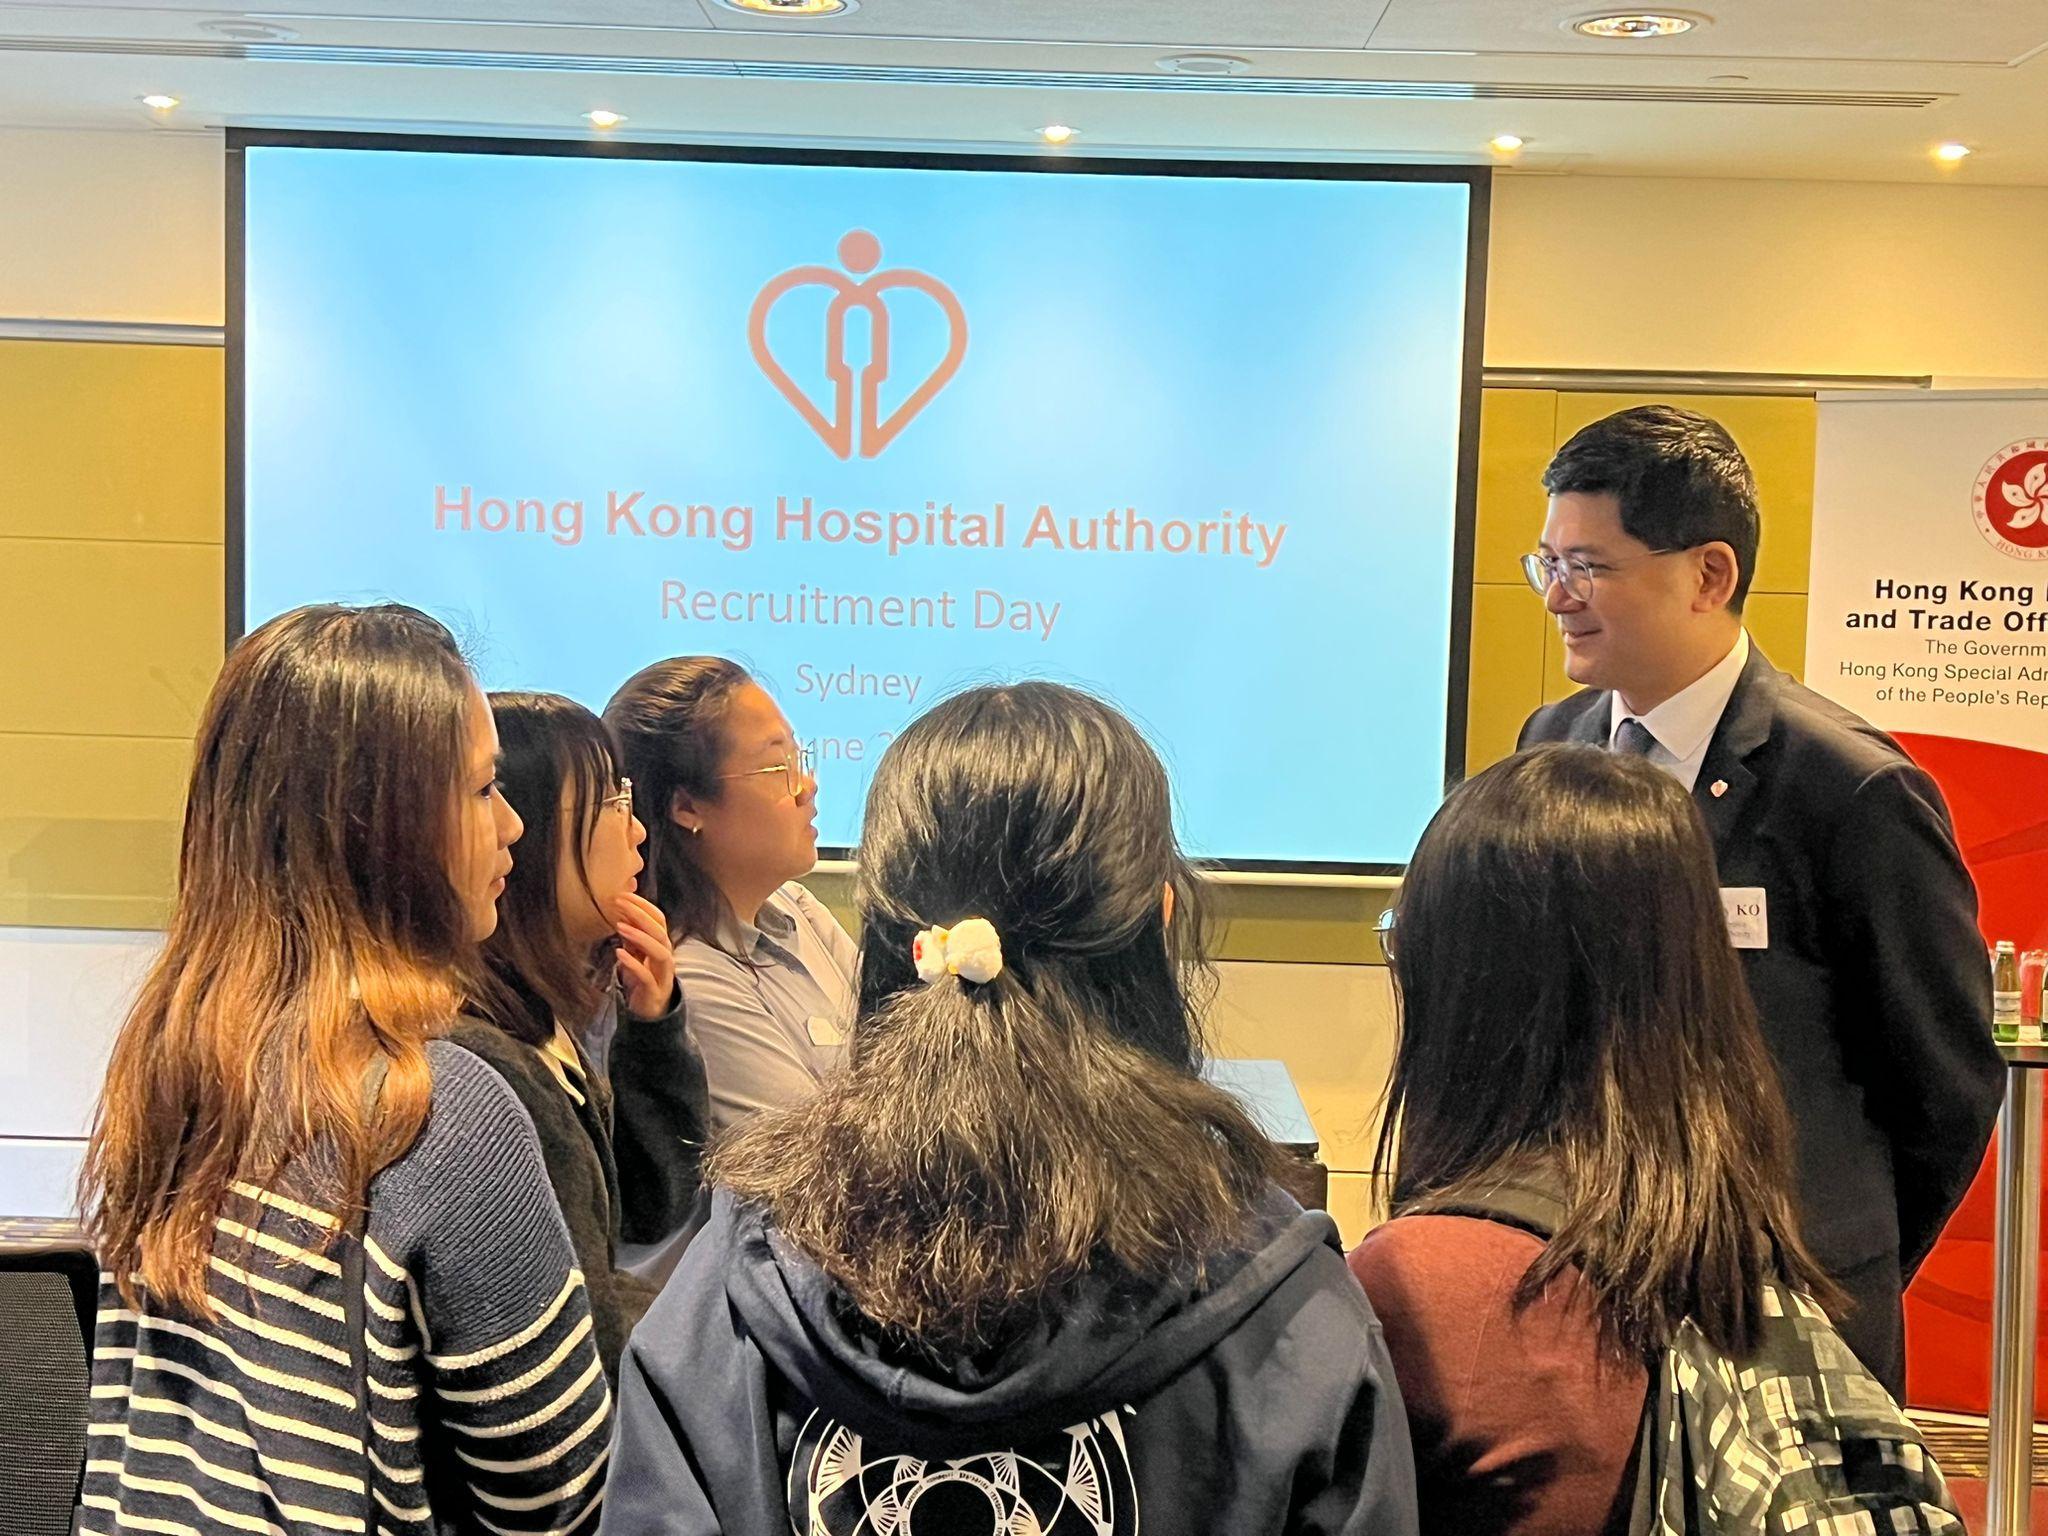 The Hospital Authority Chief Executive, Dr Tony Ko (first right) encouraged the medical students and medical practitioners from Australia to work in public hospitals in Hong Kong, and said the HA would provide necessary supports to those interested in coming to Hong Kong at the recruitment event held in Sydney, Australia today (June 3).